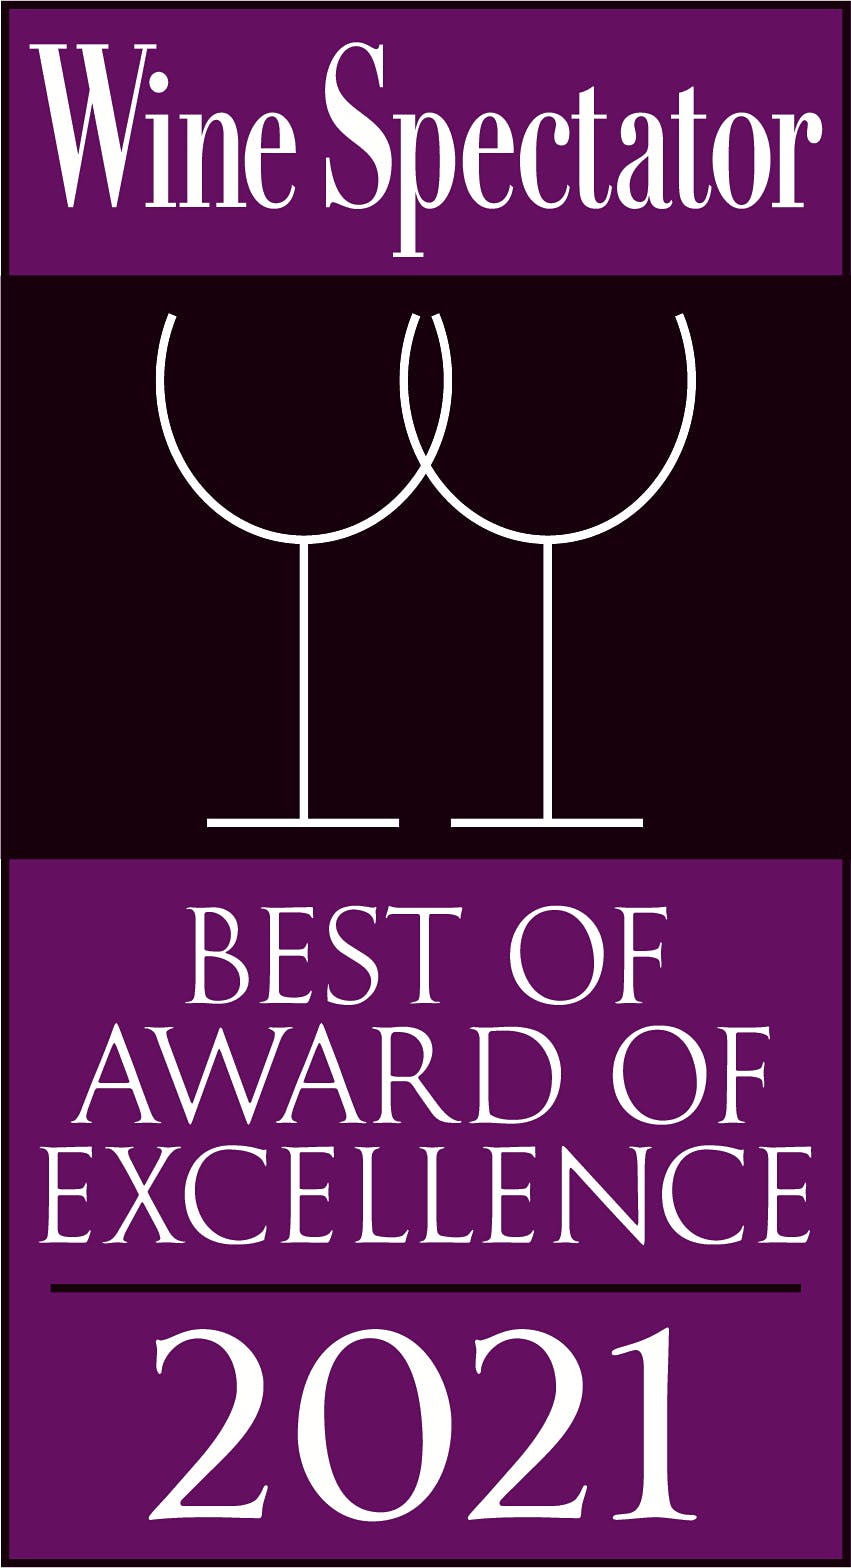 Wine Spectator Best of Award of Excellence 2021